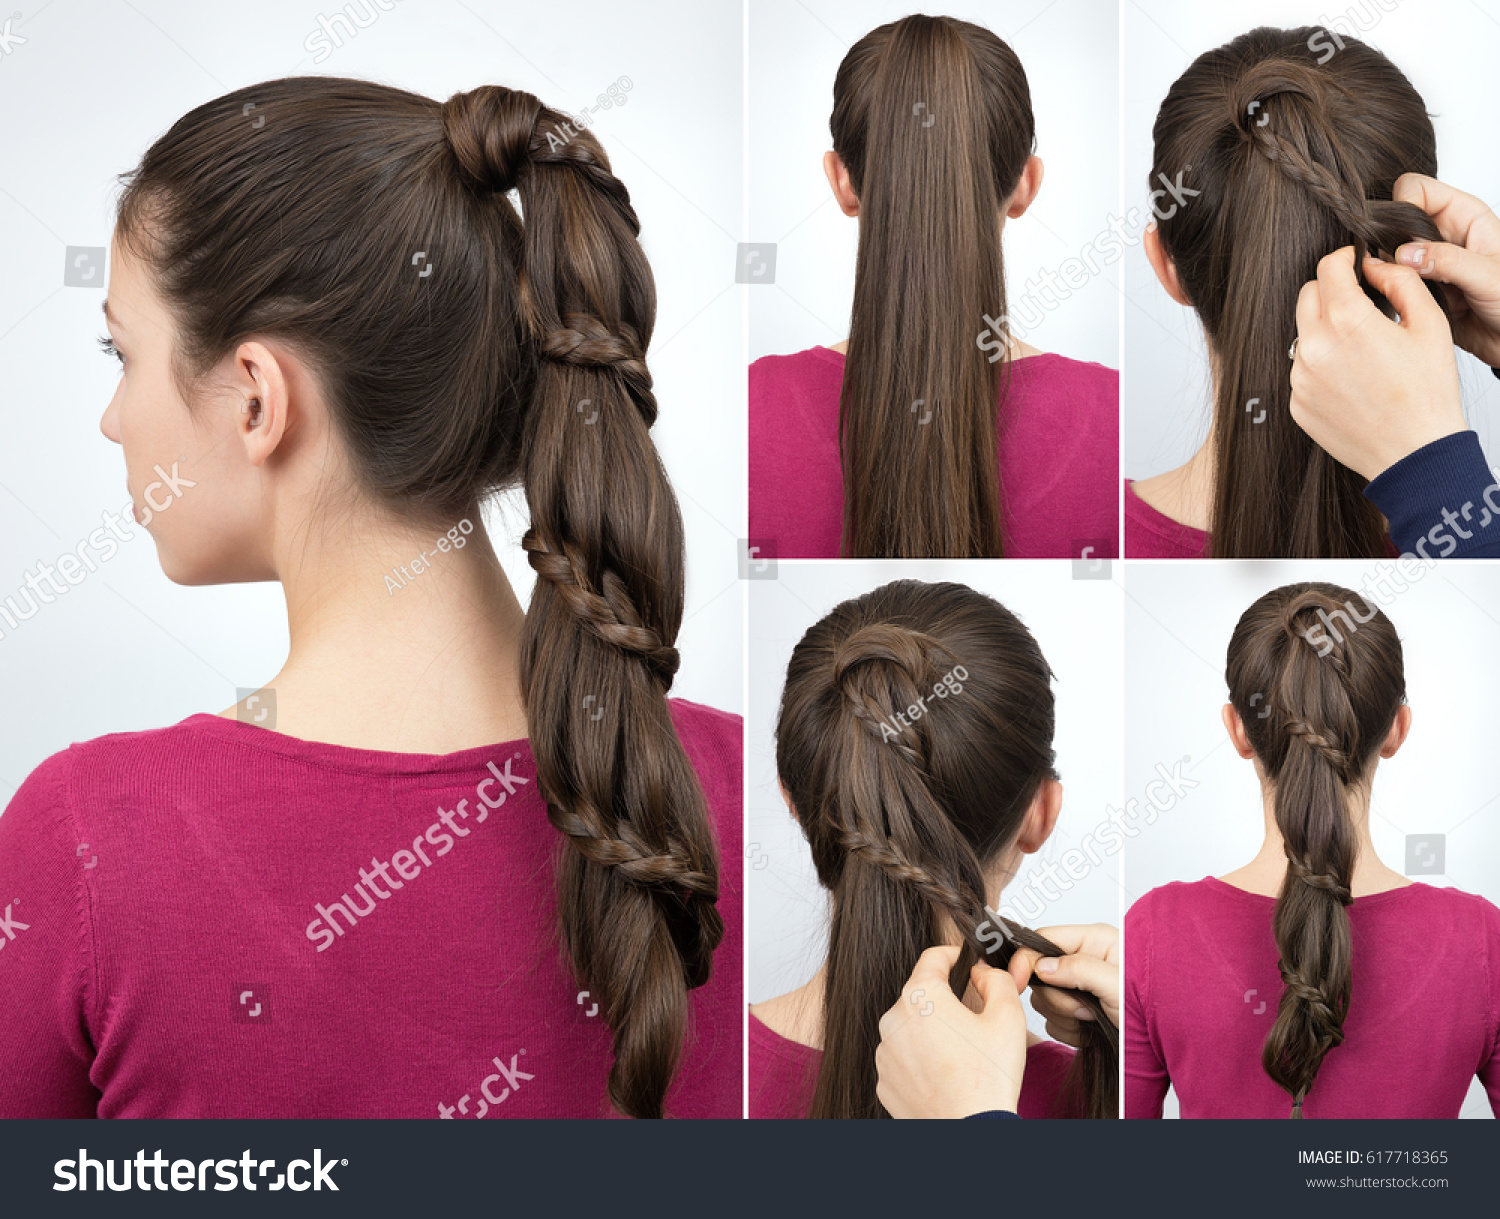 Hairstyle steps Images, Stock Photos & Vectors | Shutterstock